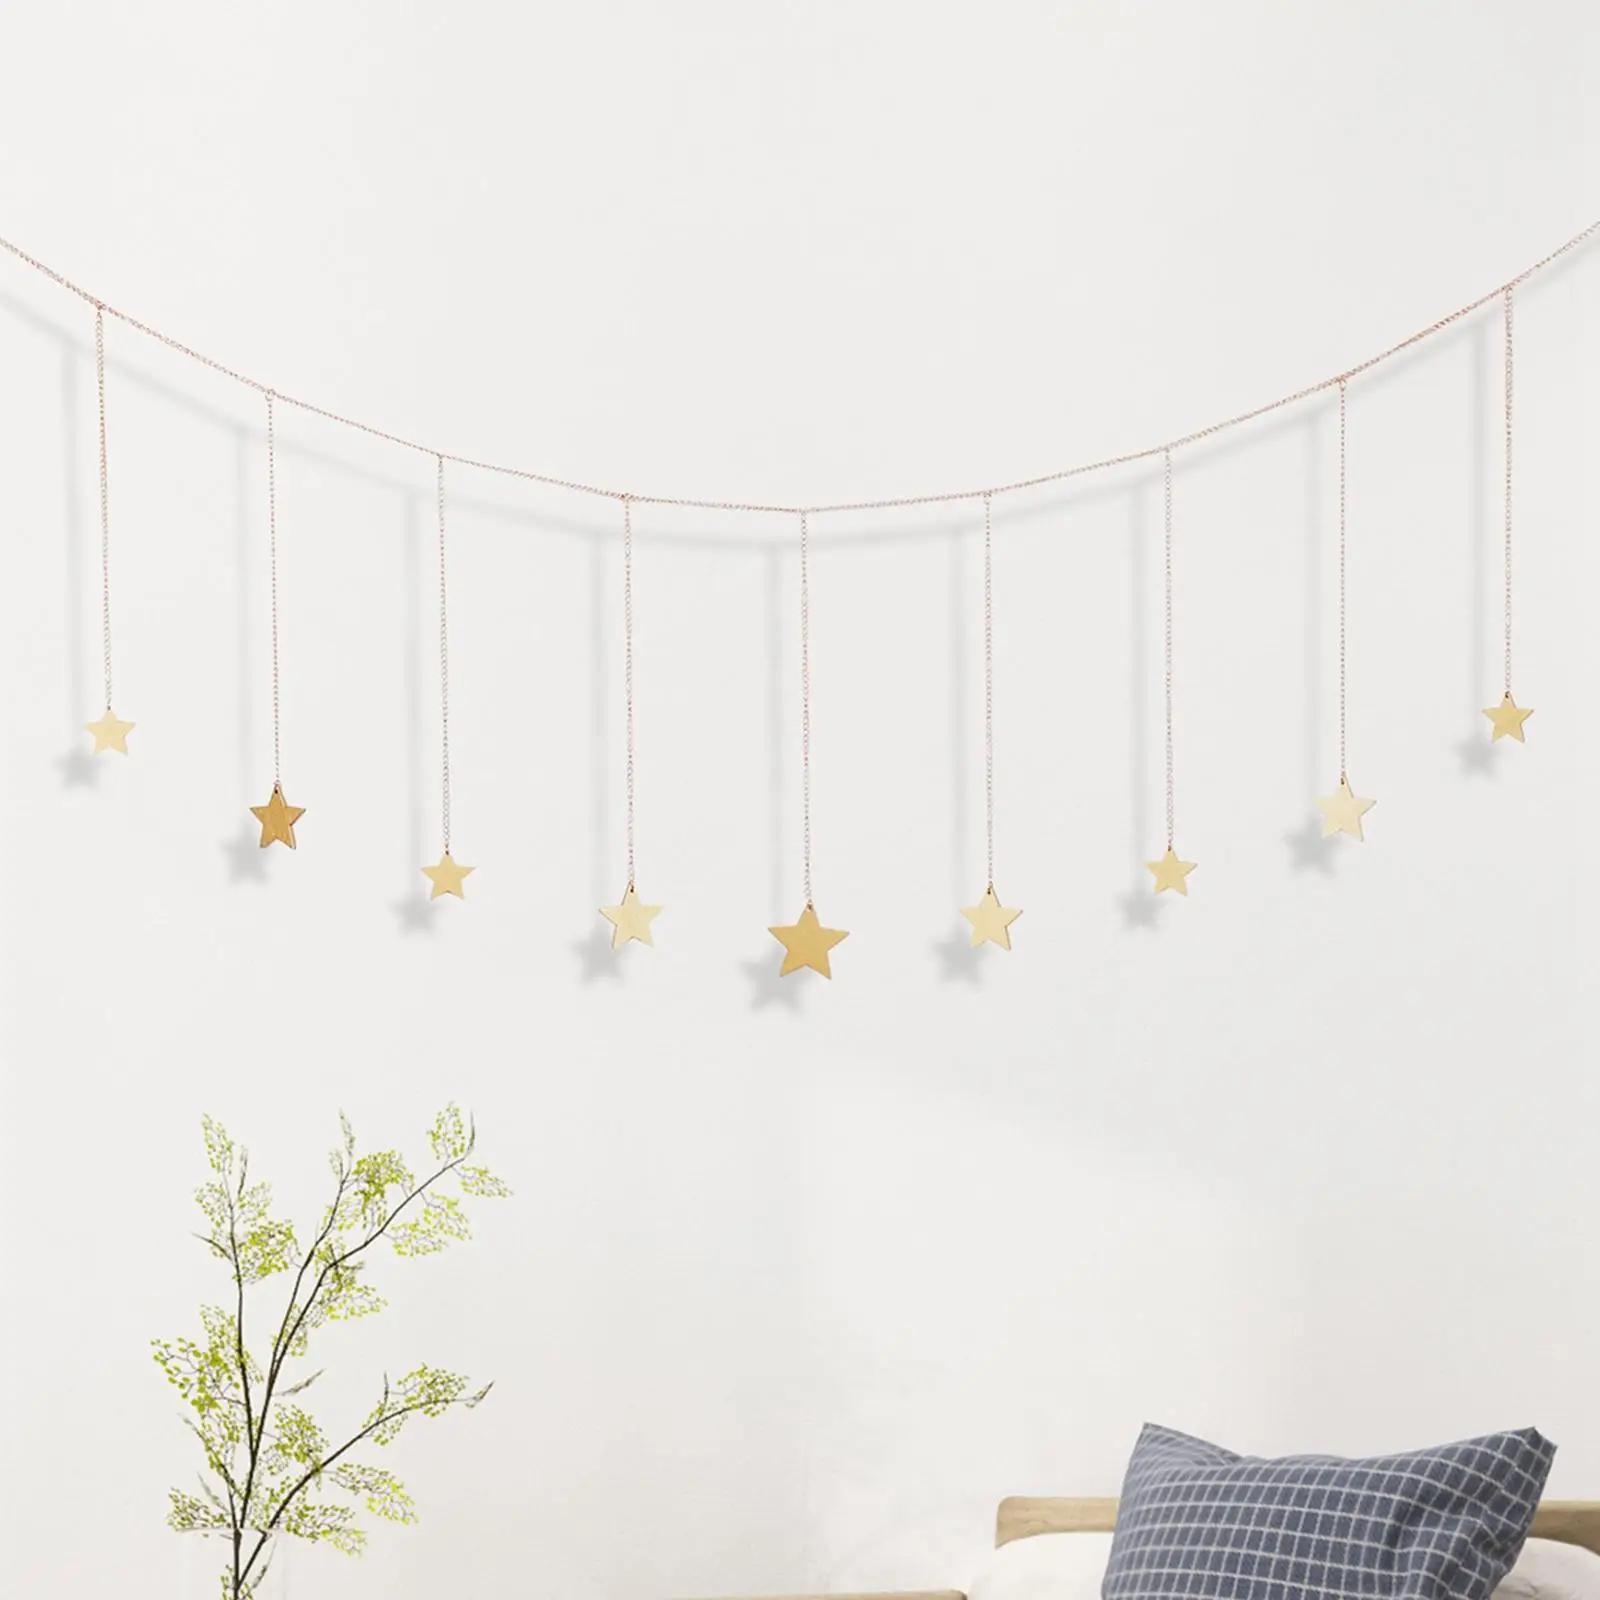 Bohemian Style Star Garland Decor Wall Art Aesthetic Decorative Wall Hanging Decoration for Party Dorm Living Room Office Home